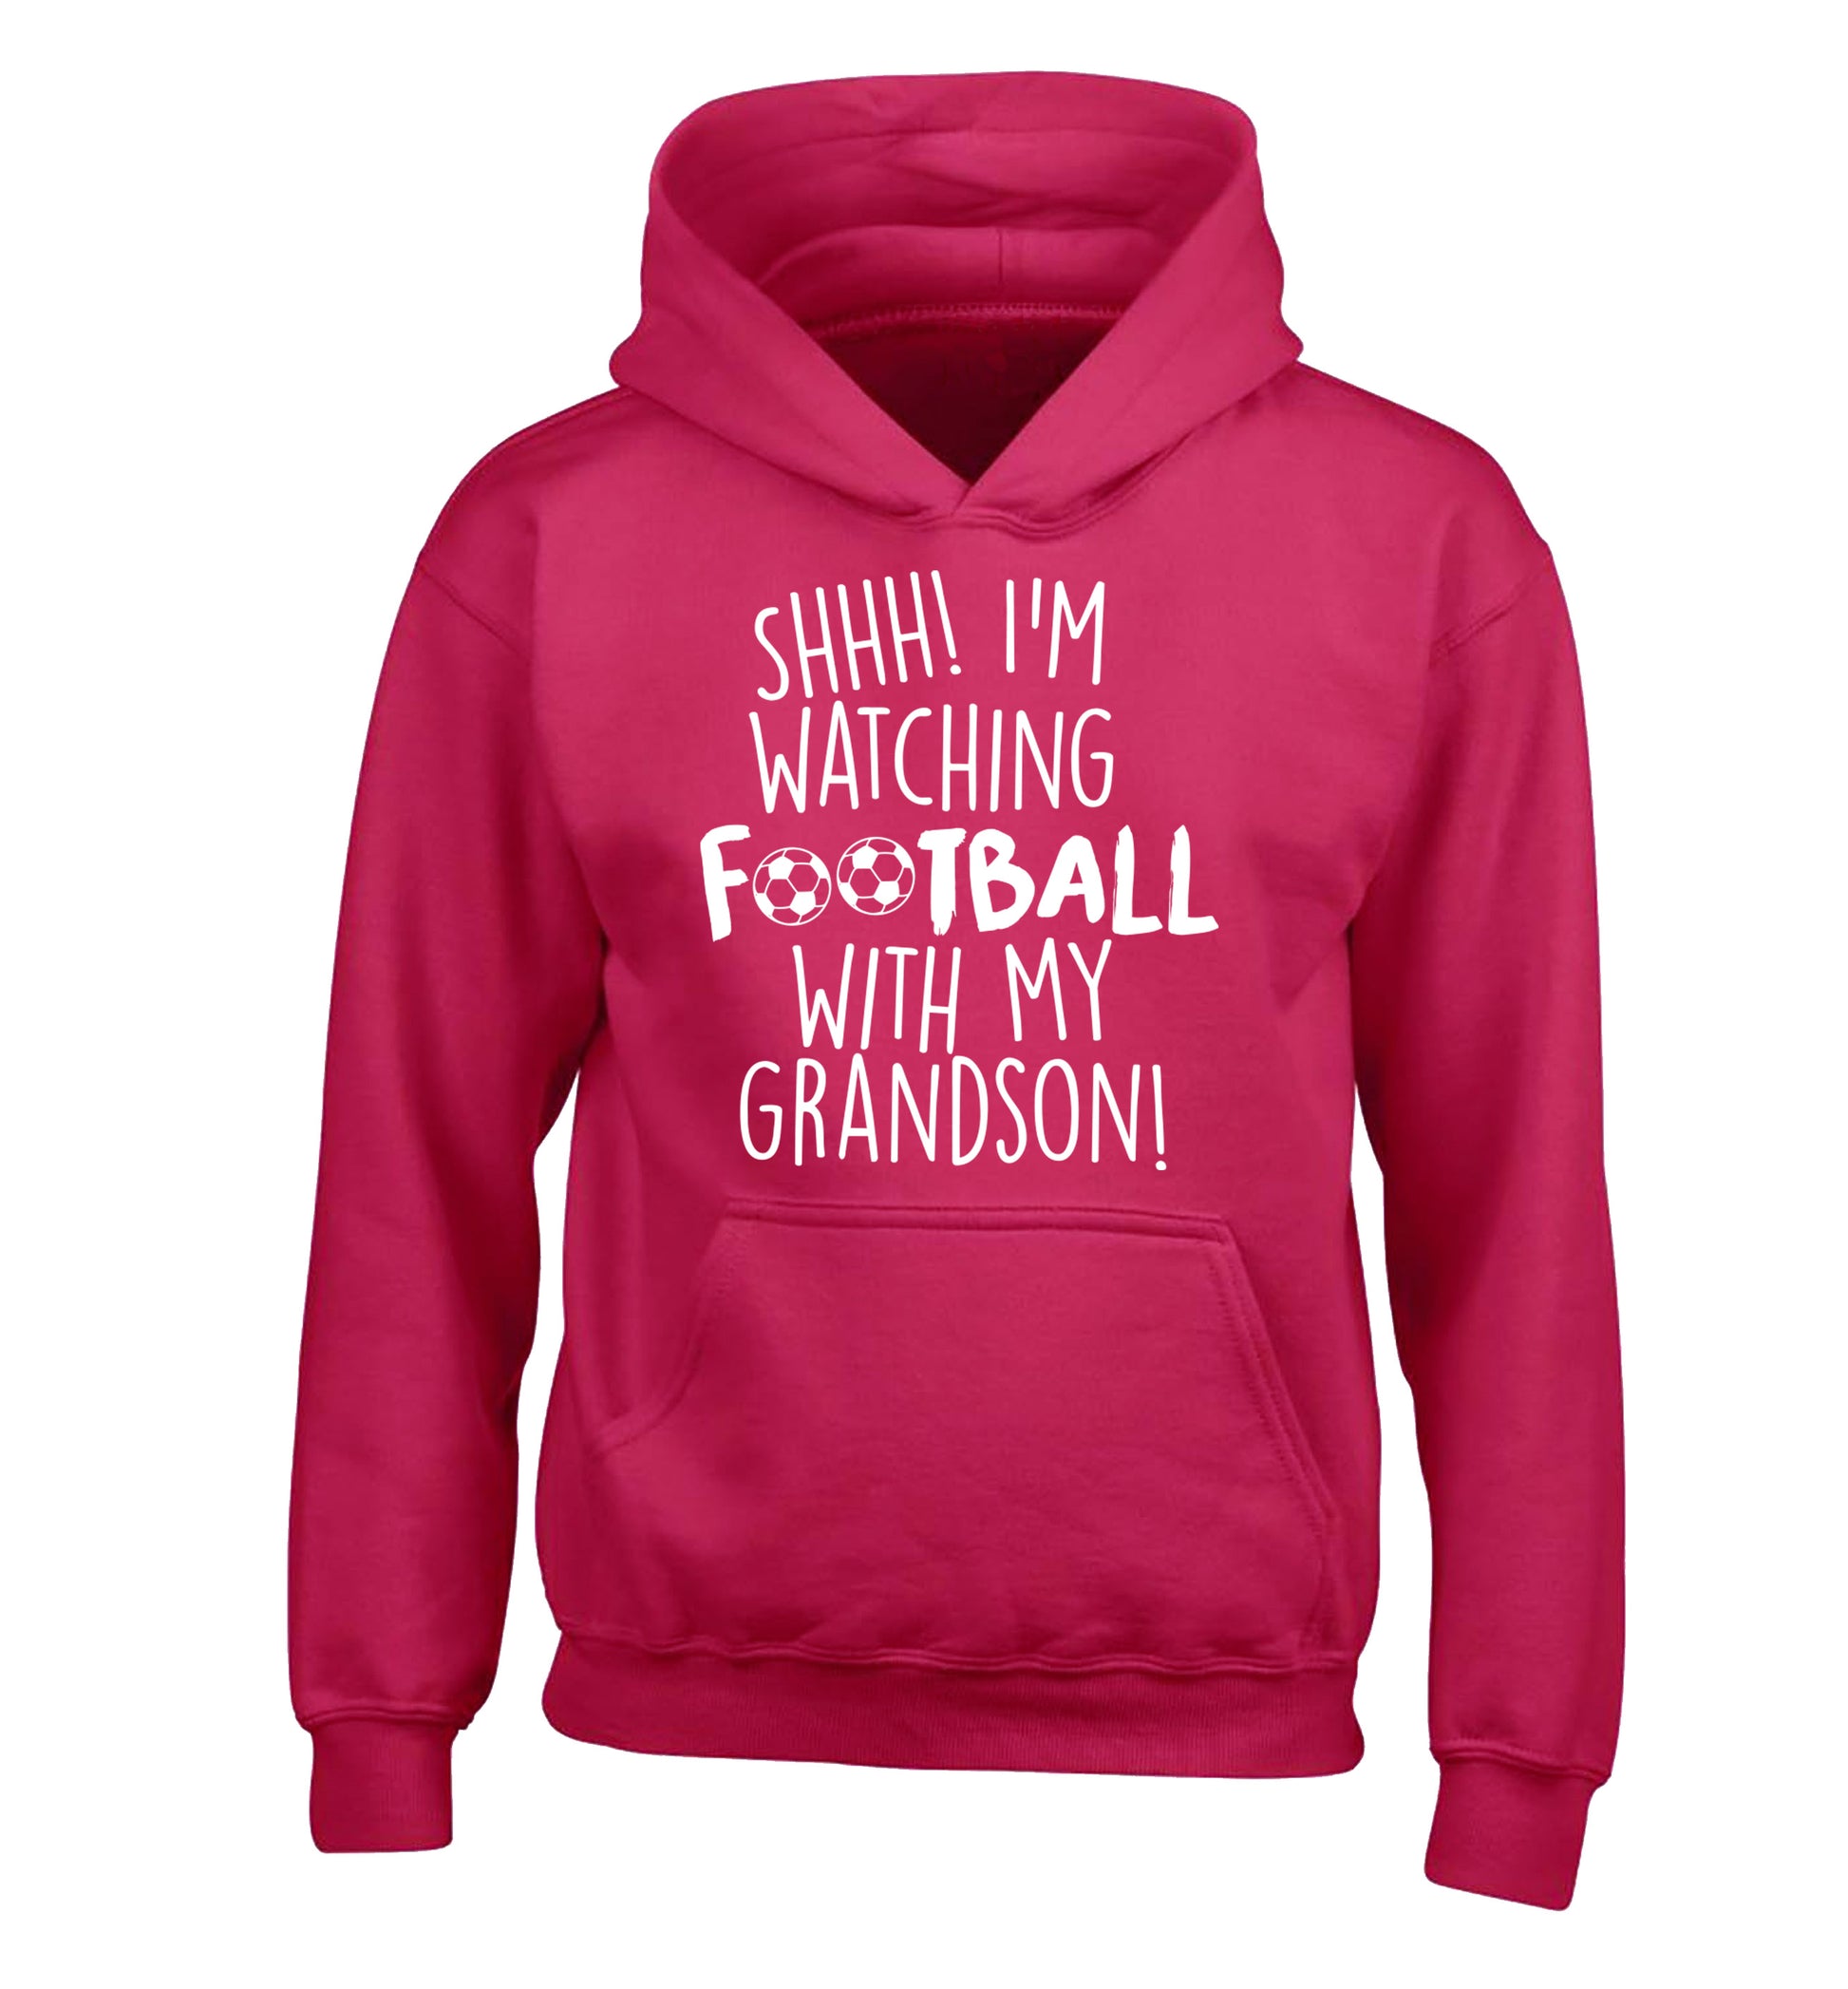 Shhh I'm watching football with my grandson children's pink hoodie 12-14 Years